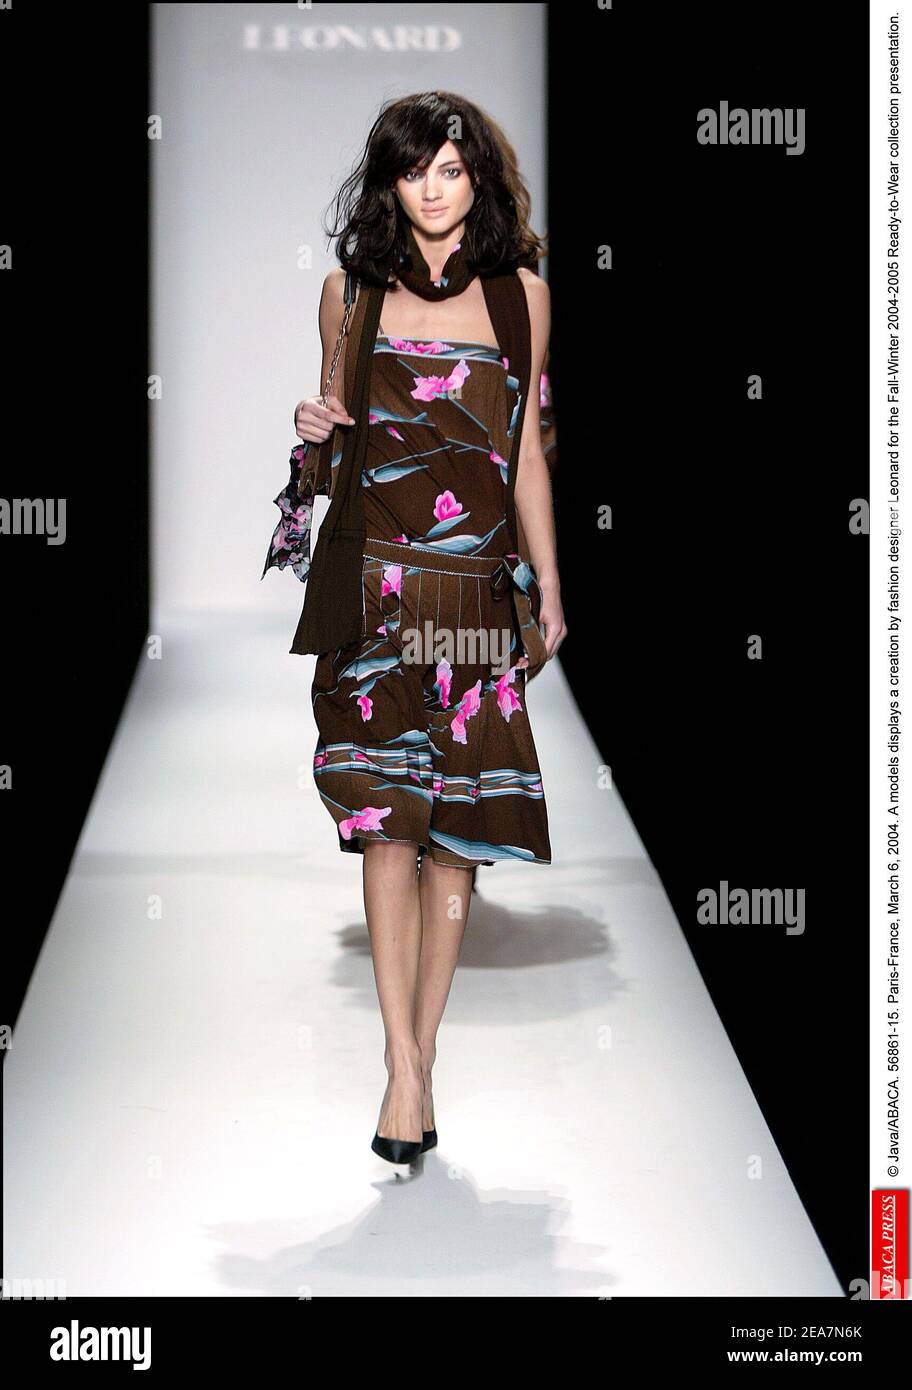 © Java/ABACA. 56861. Paris-France, March 6, 2004. A model displays a creation by fashion designer Leonard for the Fall-Winter 2004-2005 Ready-to-Wear collection presentation. Stock Photo